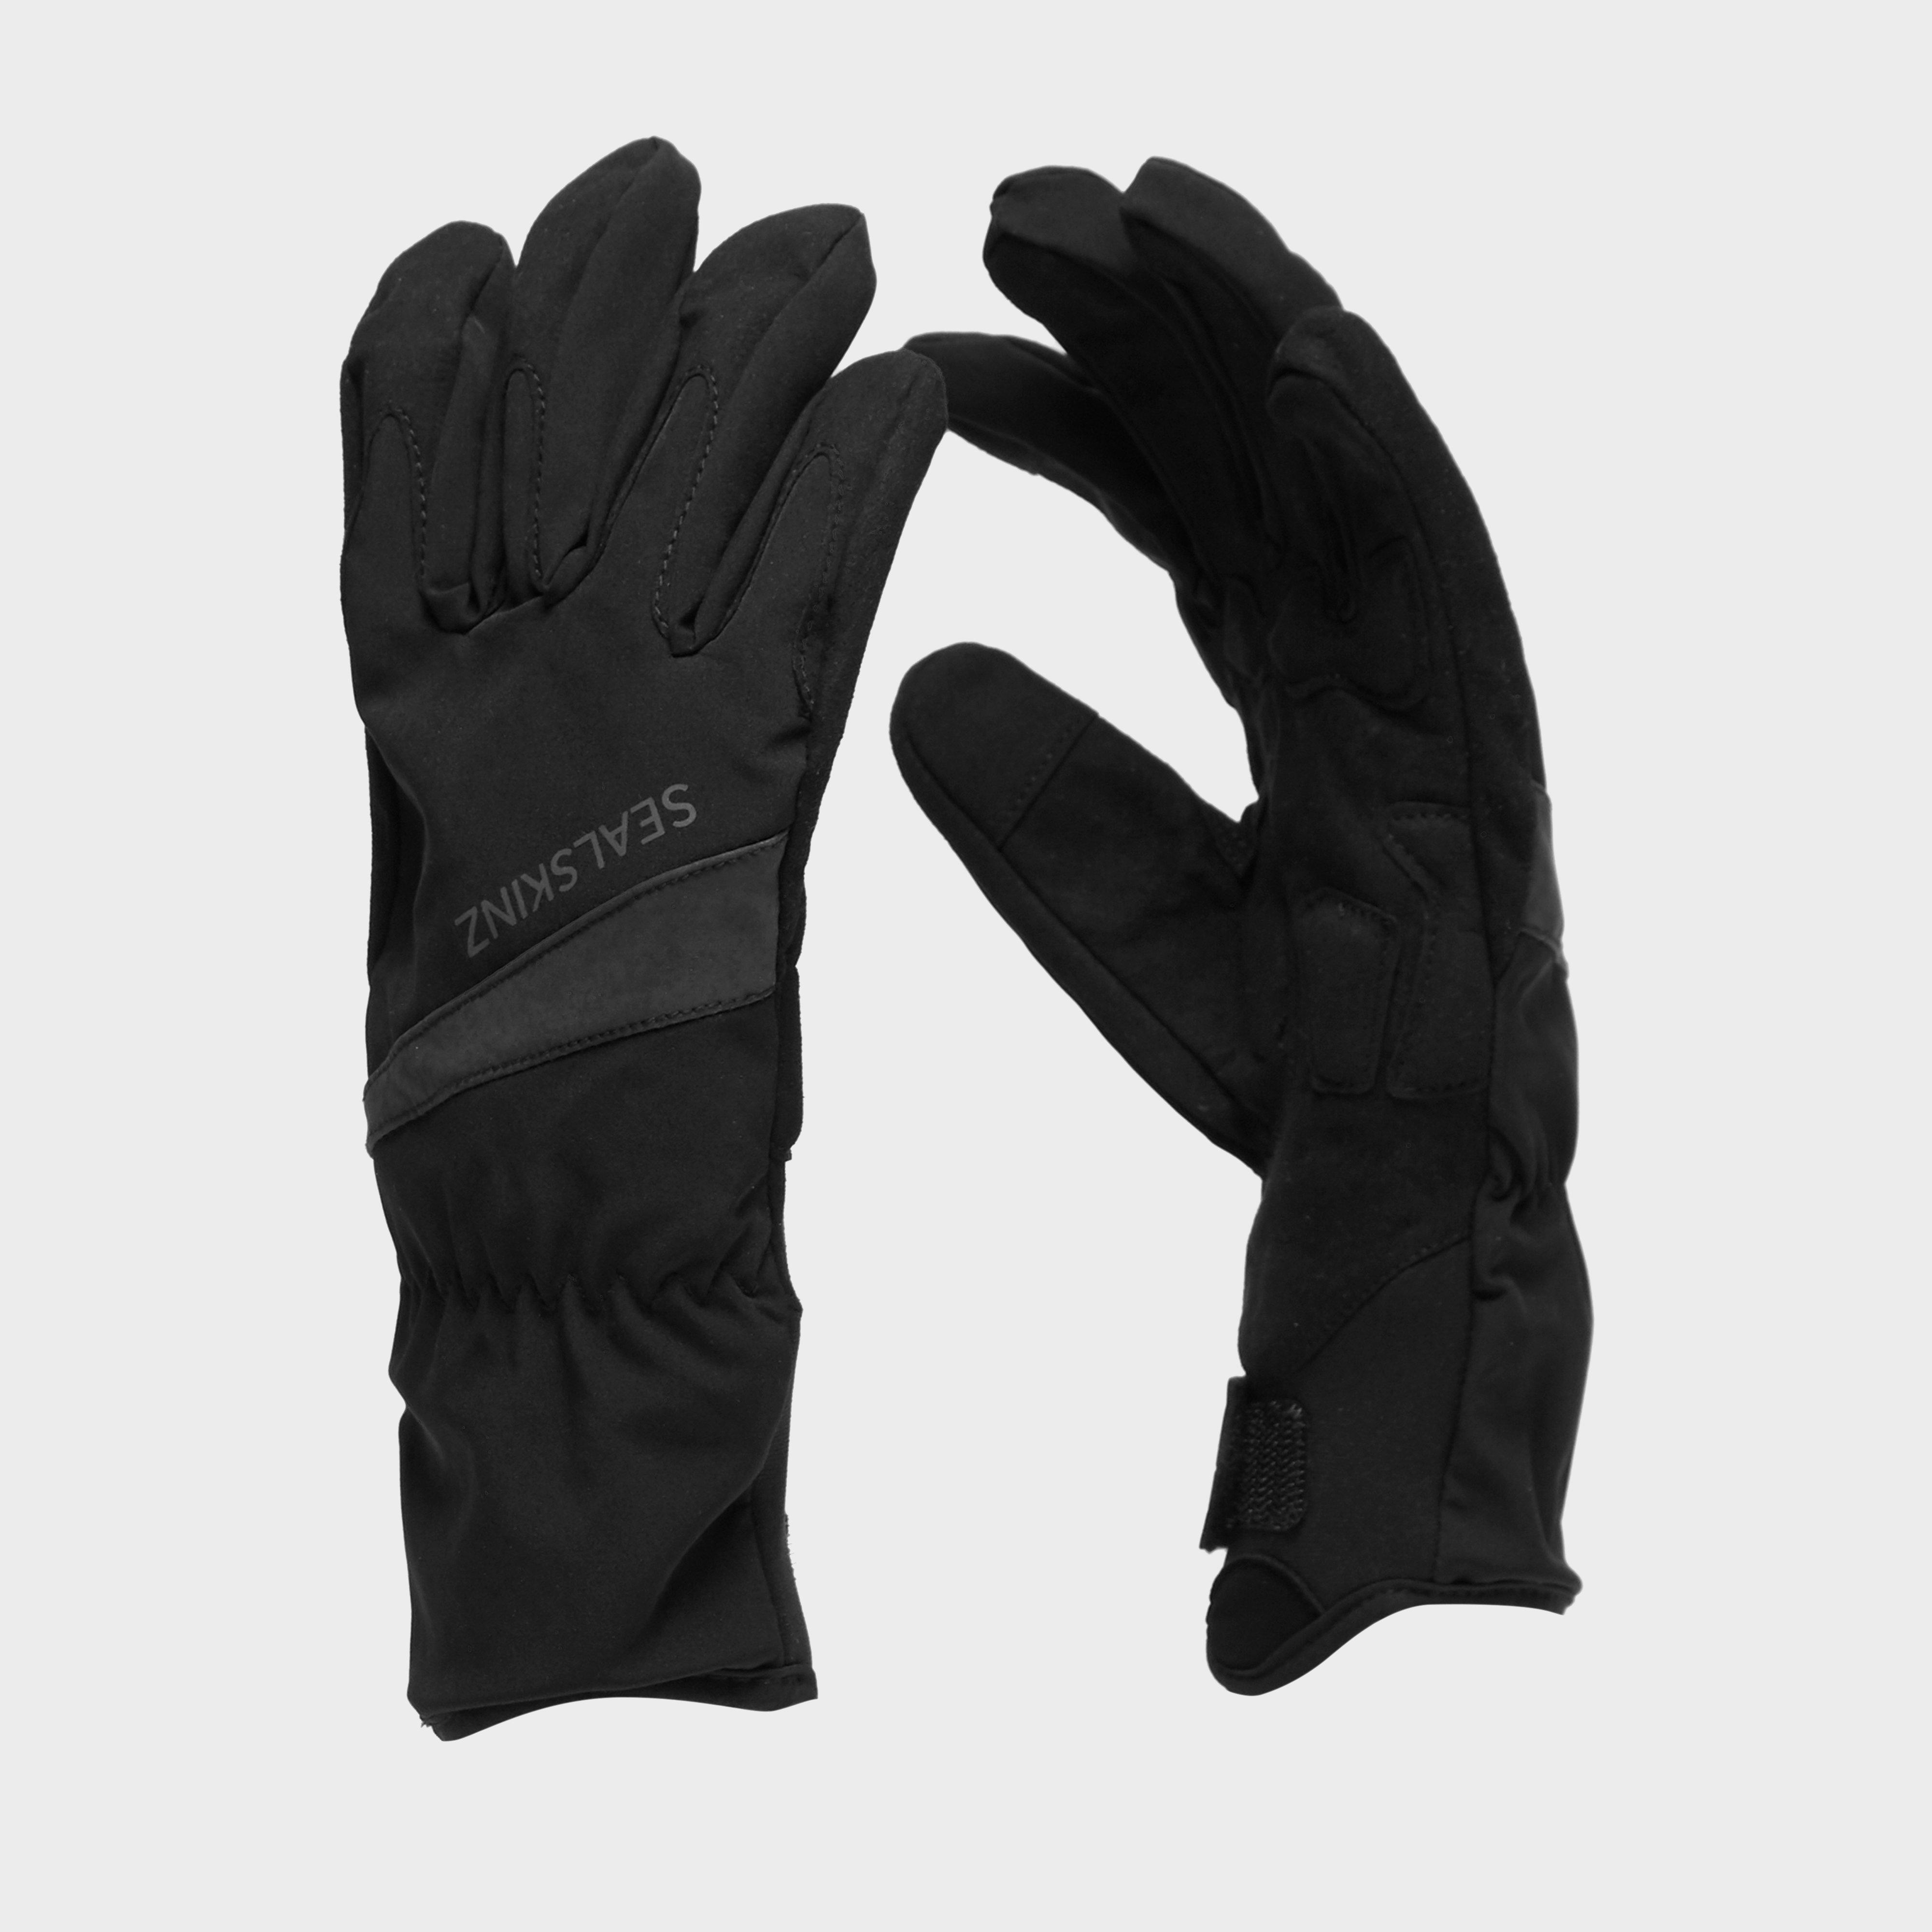 All Weather Cycle Gloves - Black product